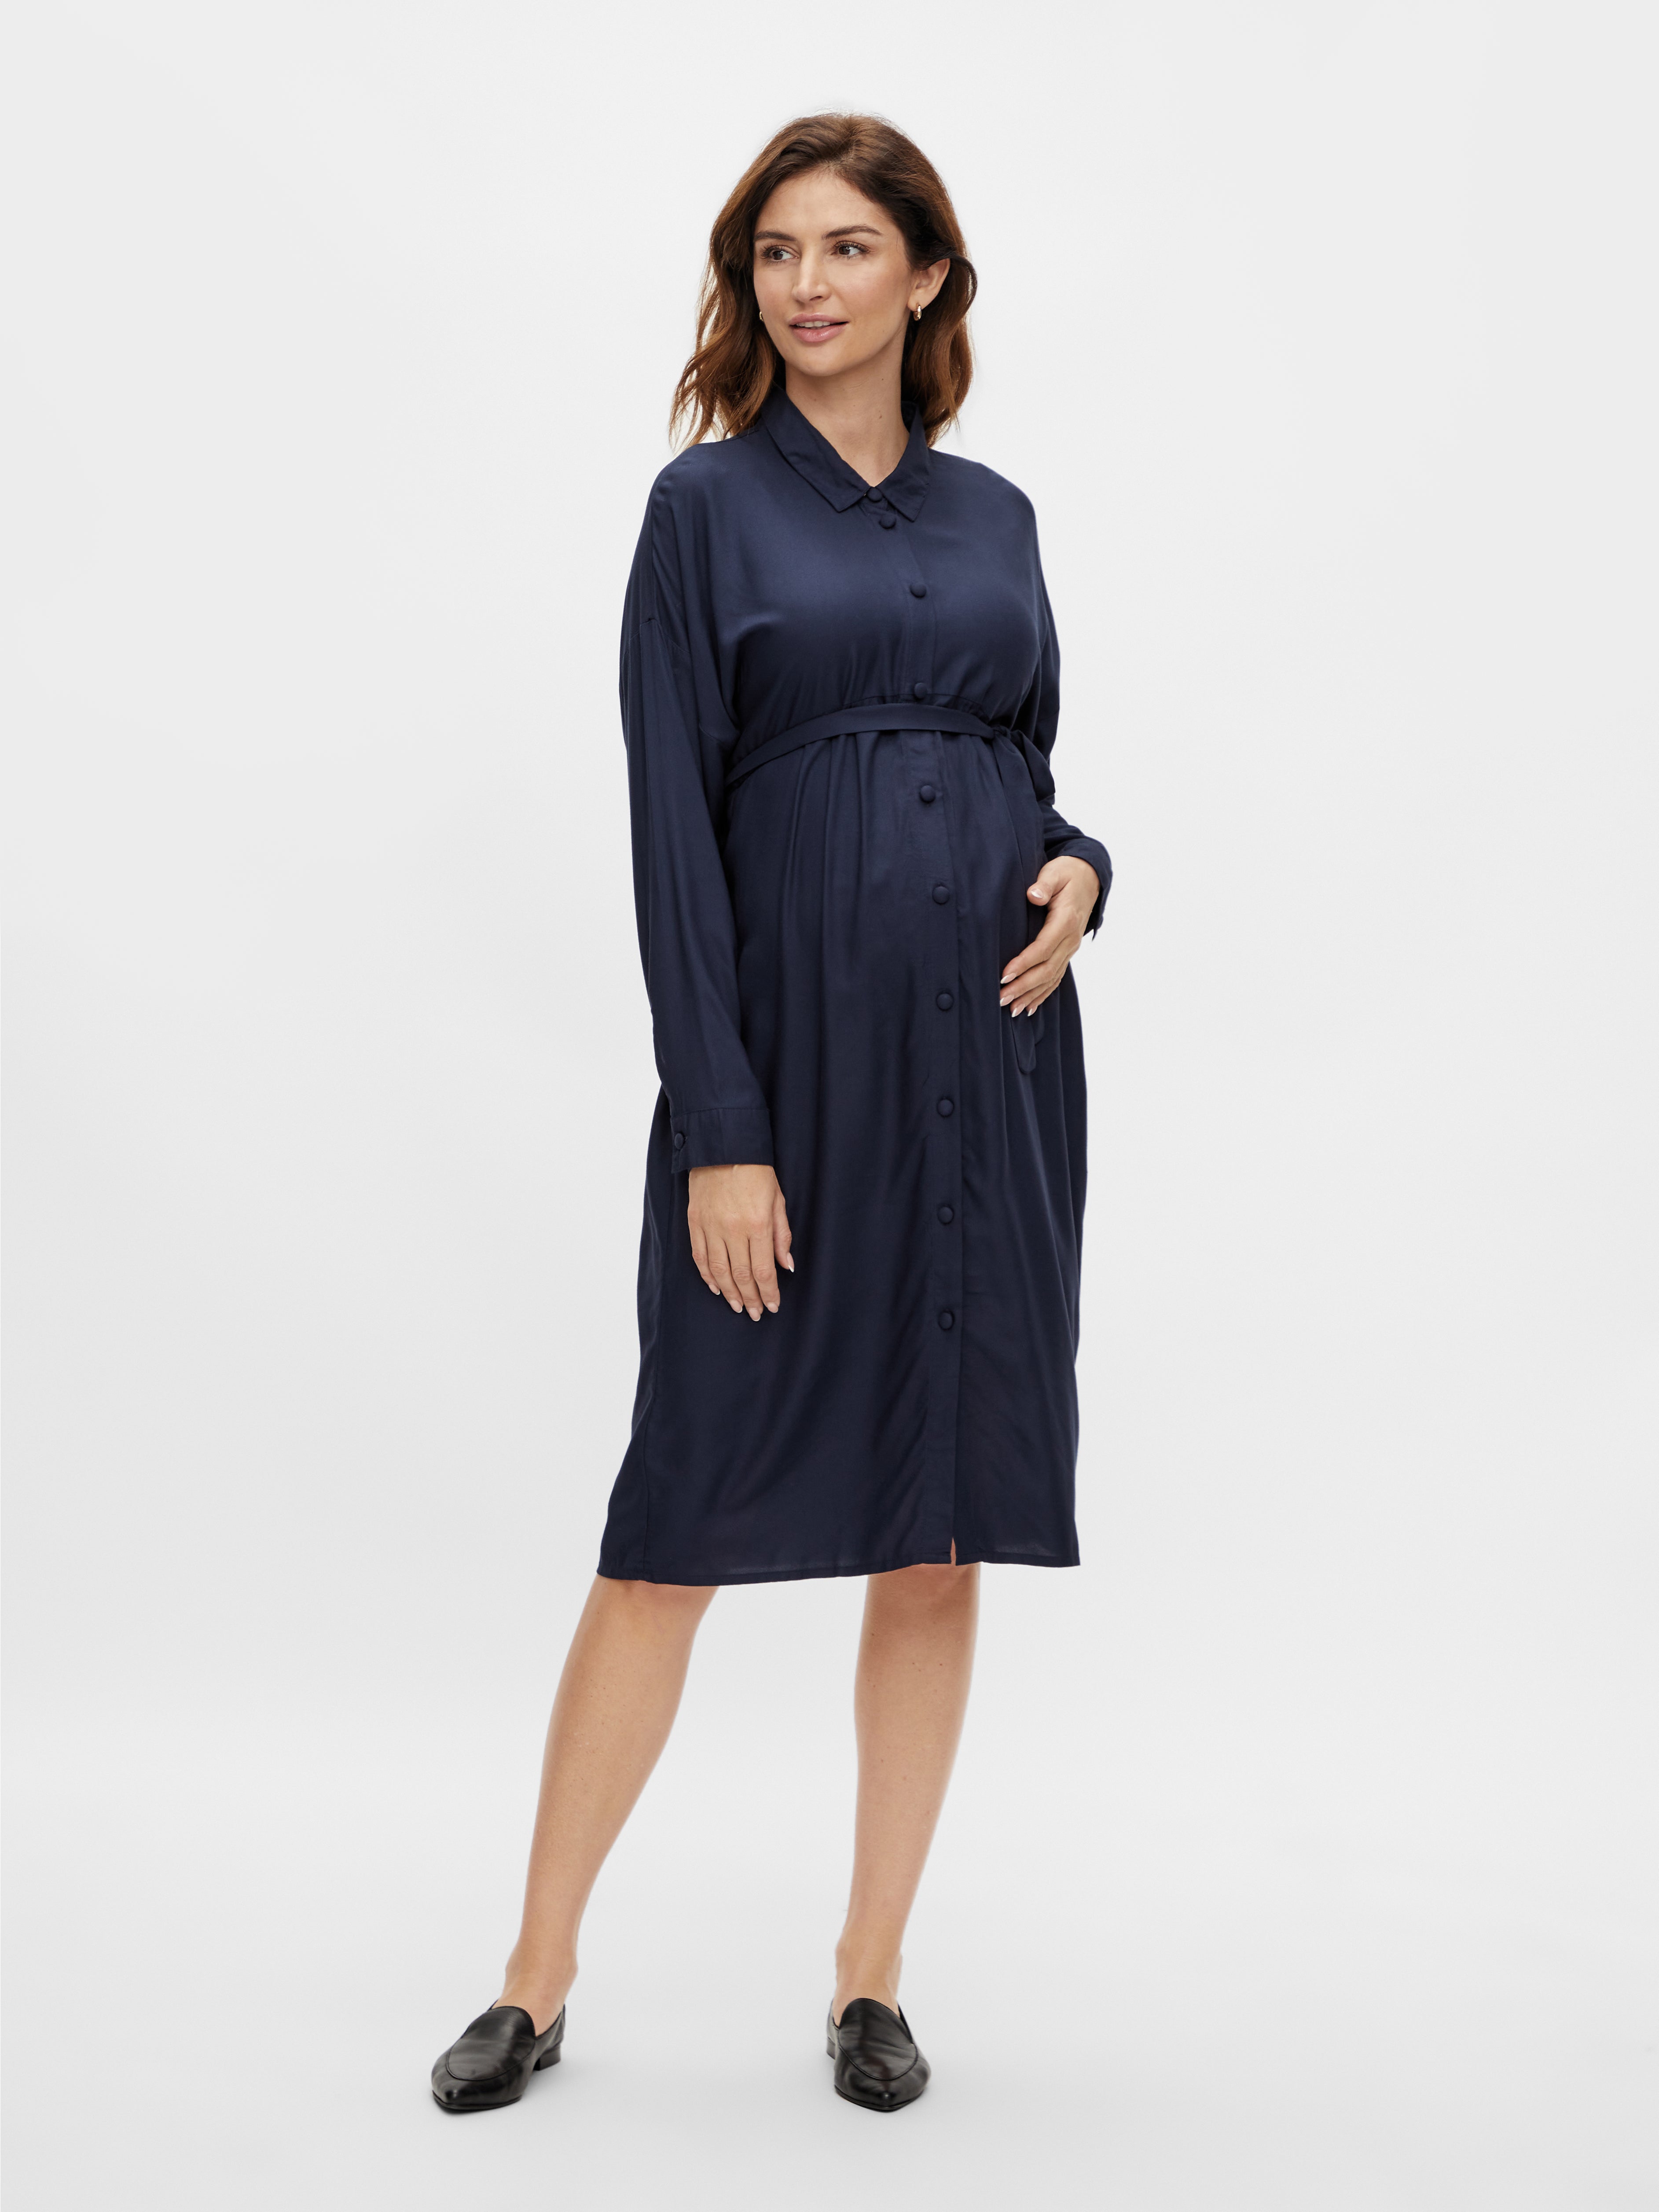 Maternity-dress with 50% discount! | MAMA.LICIOUS®